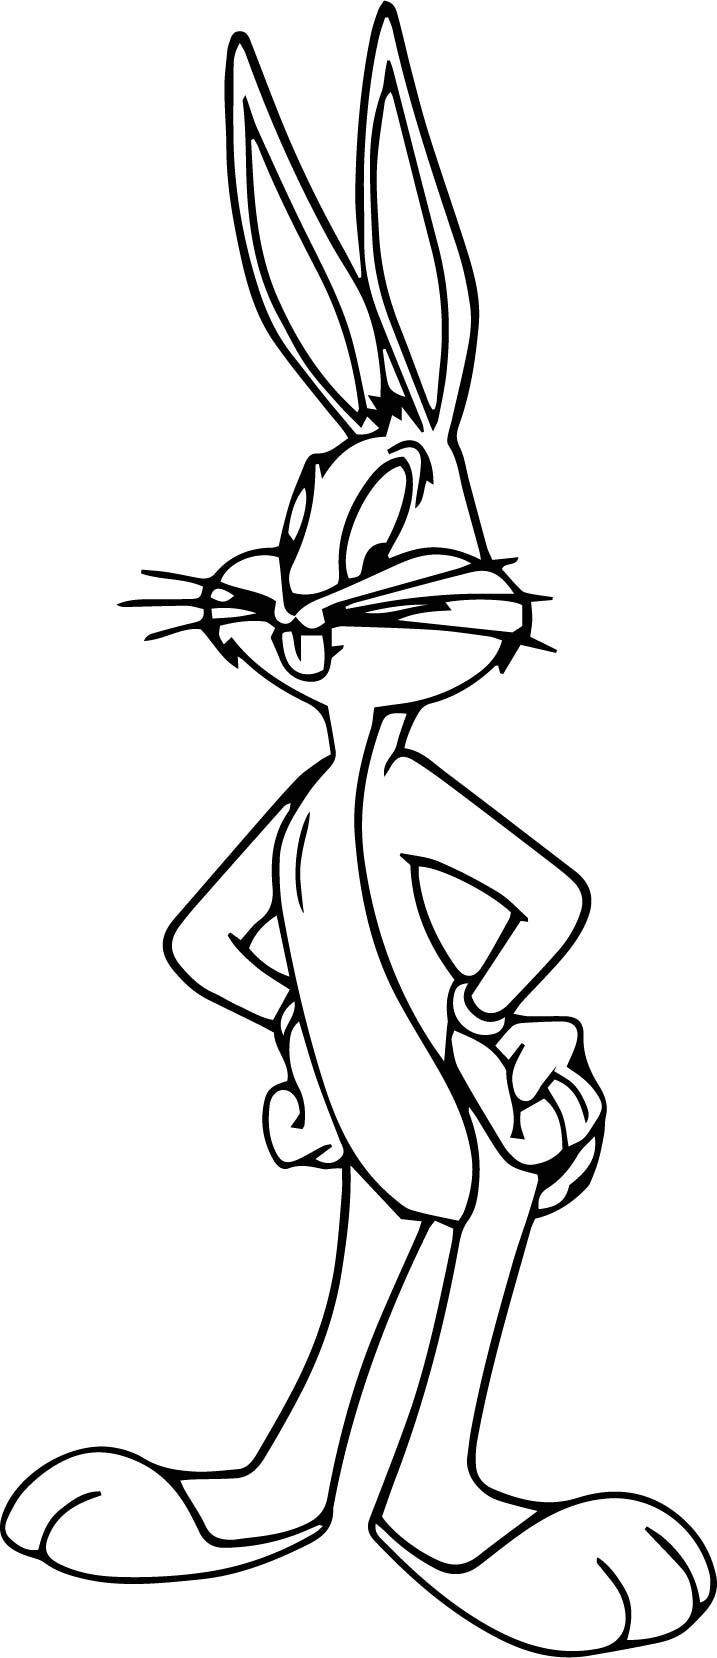 bugs-bunny-coloring-pages-at-getcolorings-free-printable-colorings-pages-to-print-and-color